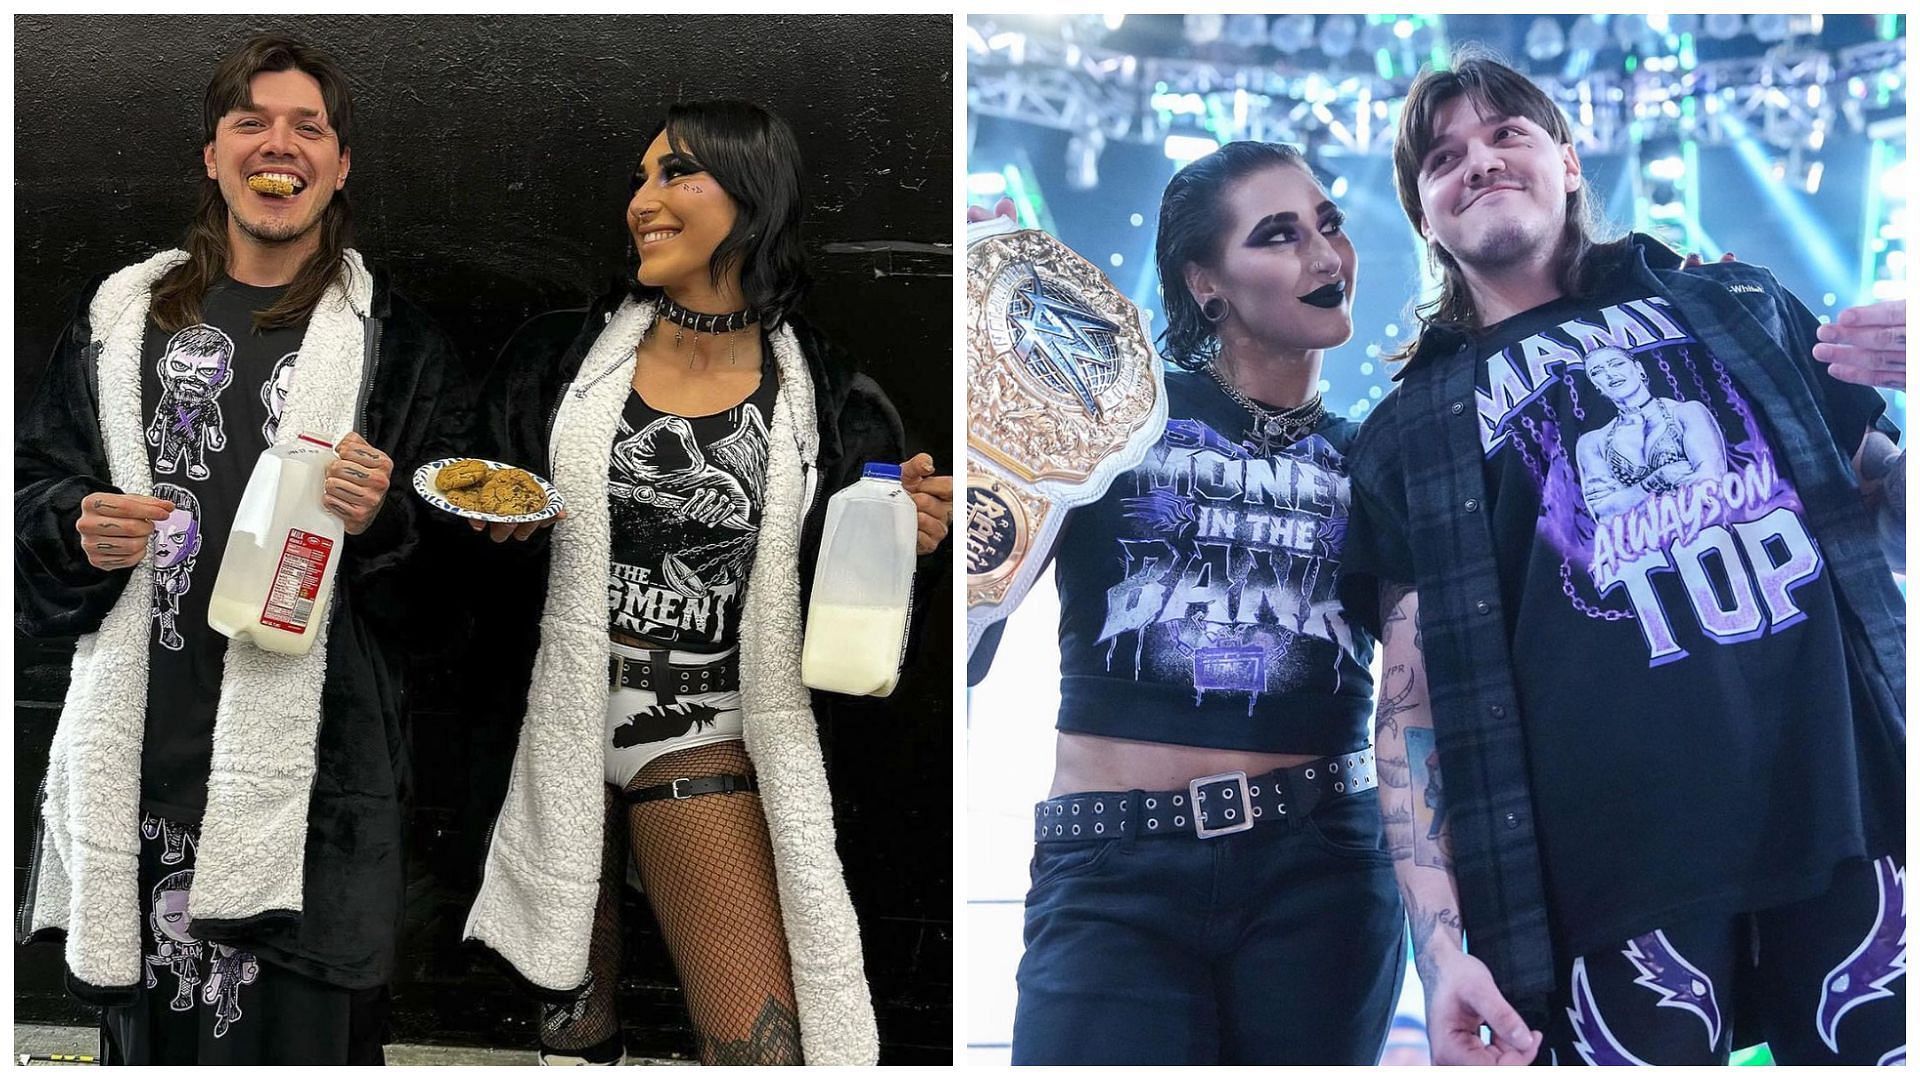 Dominik Mysterio and Rhea Ripley are a part of major WWE faction on RAW.